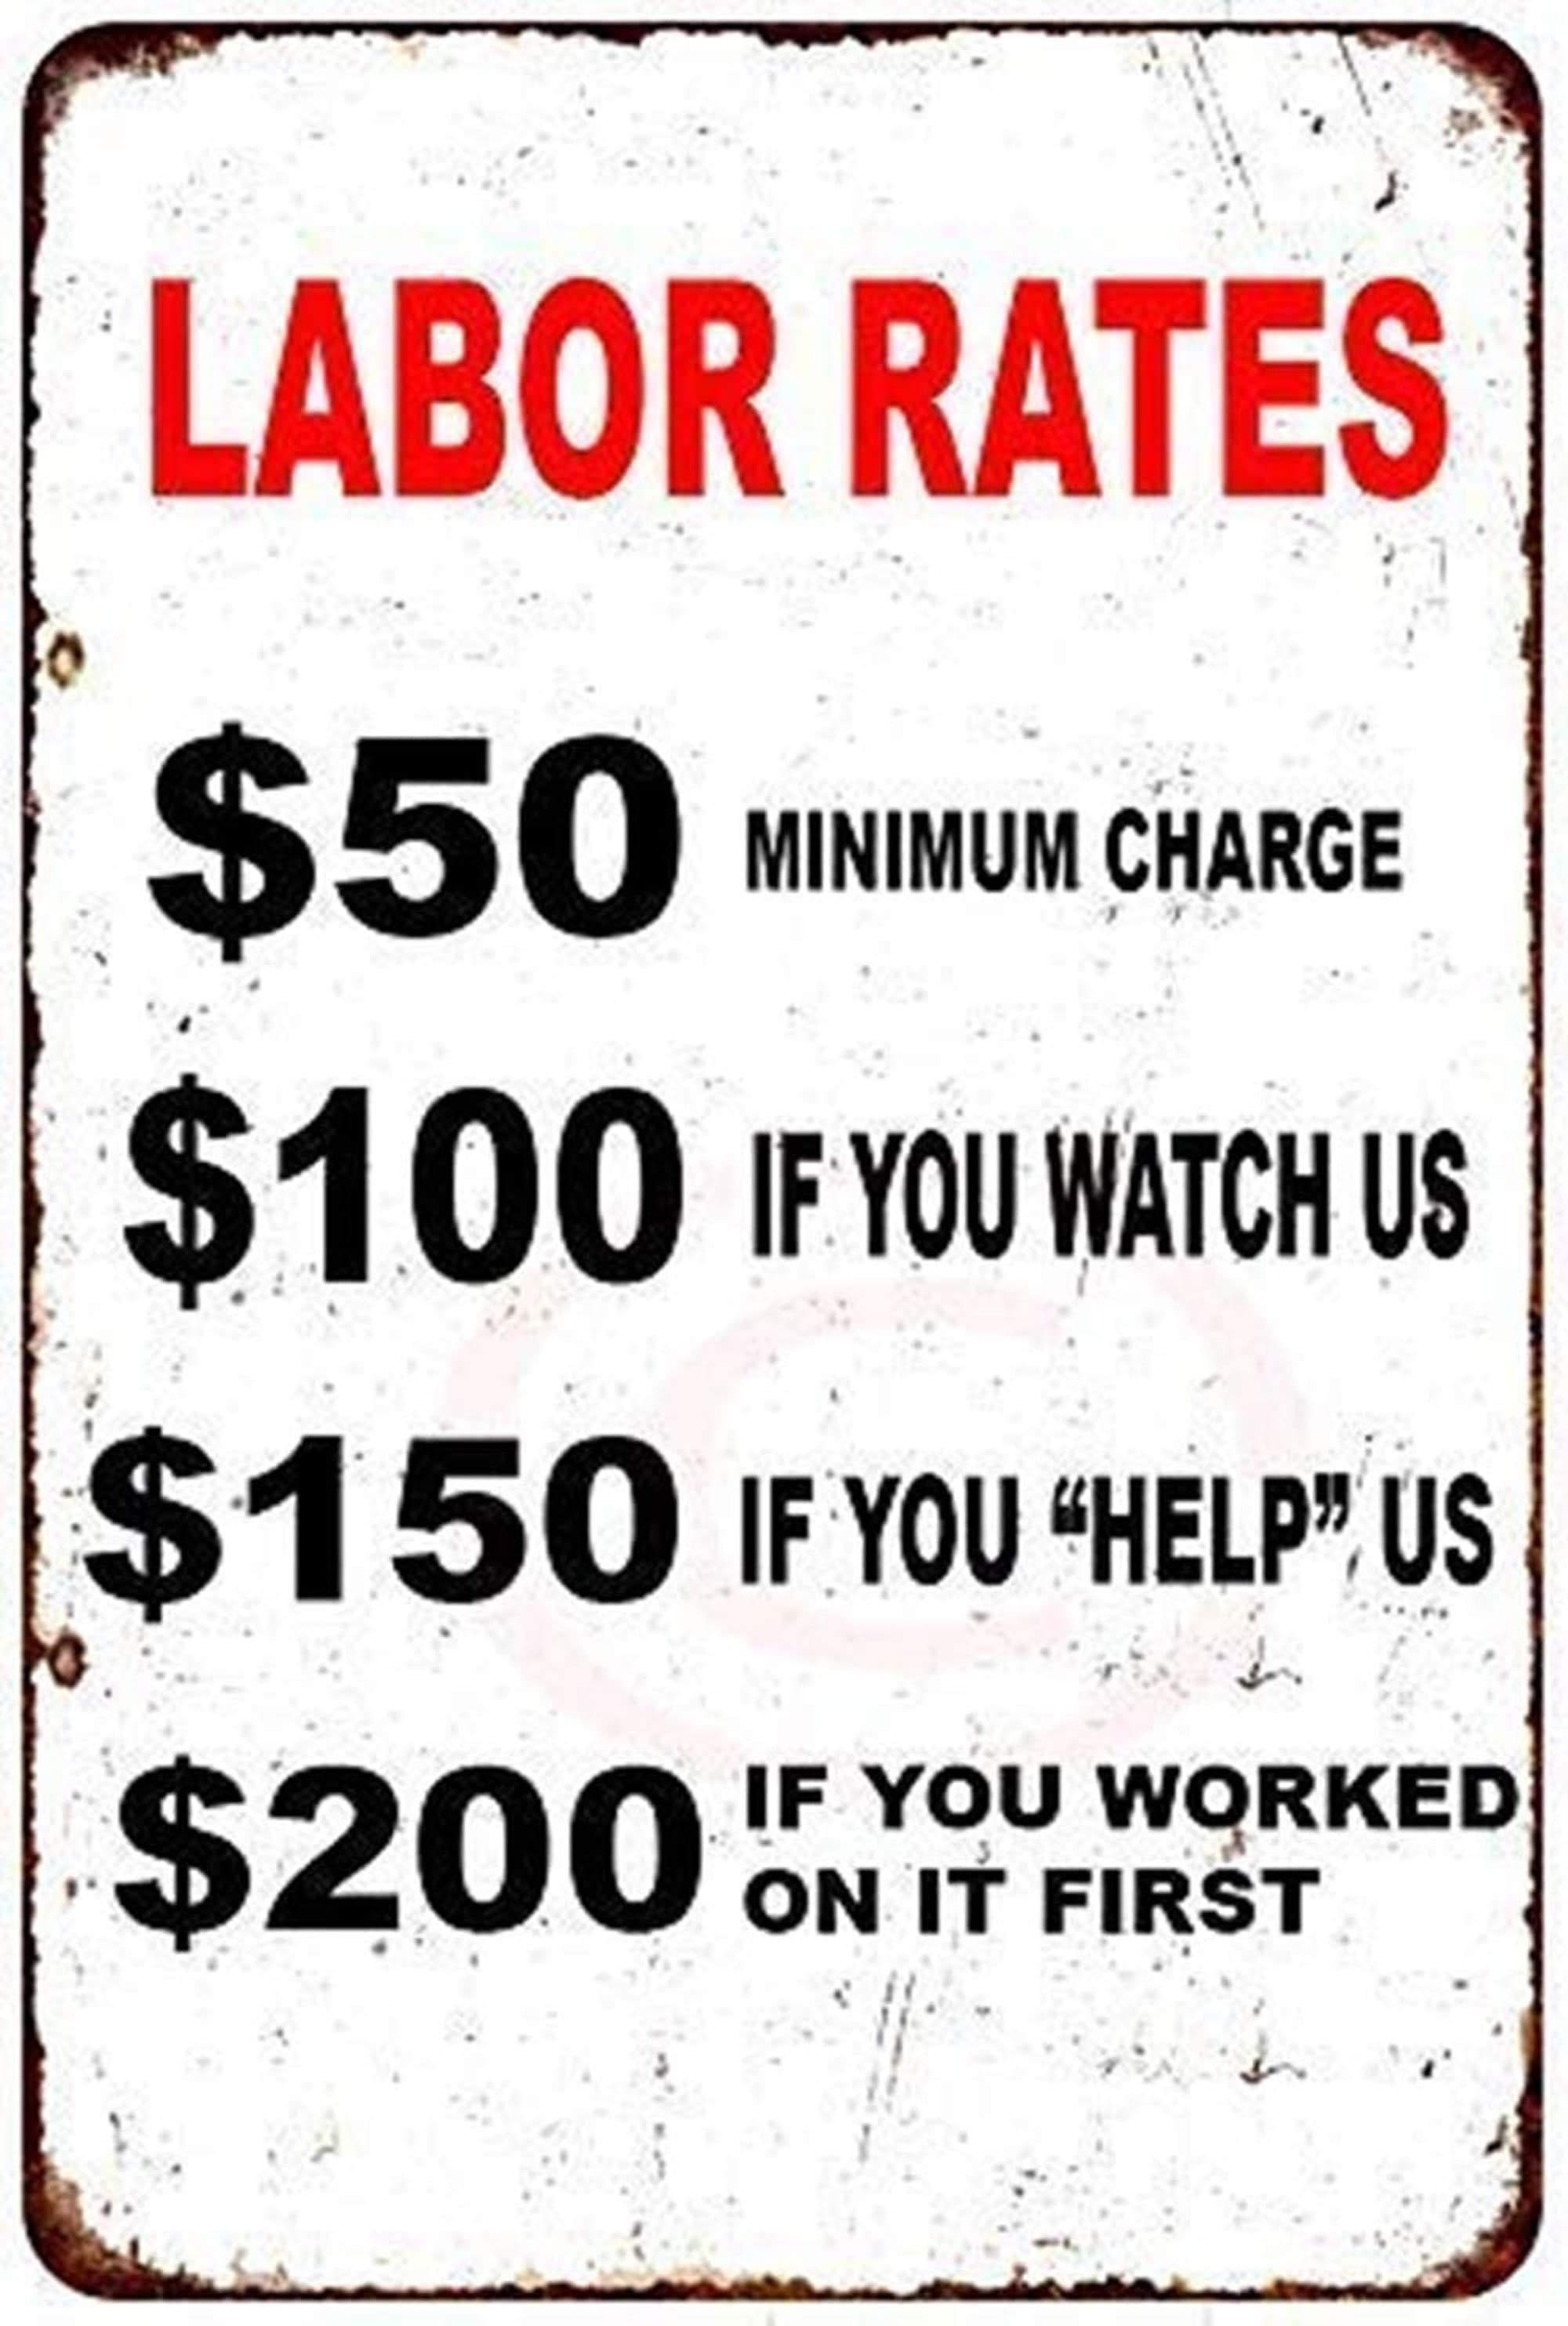 Funny Wall Decor Sign Labor Rates If You Worked on it First | Etsy